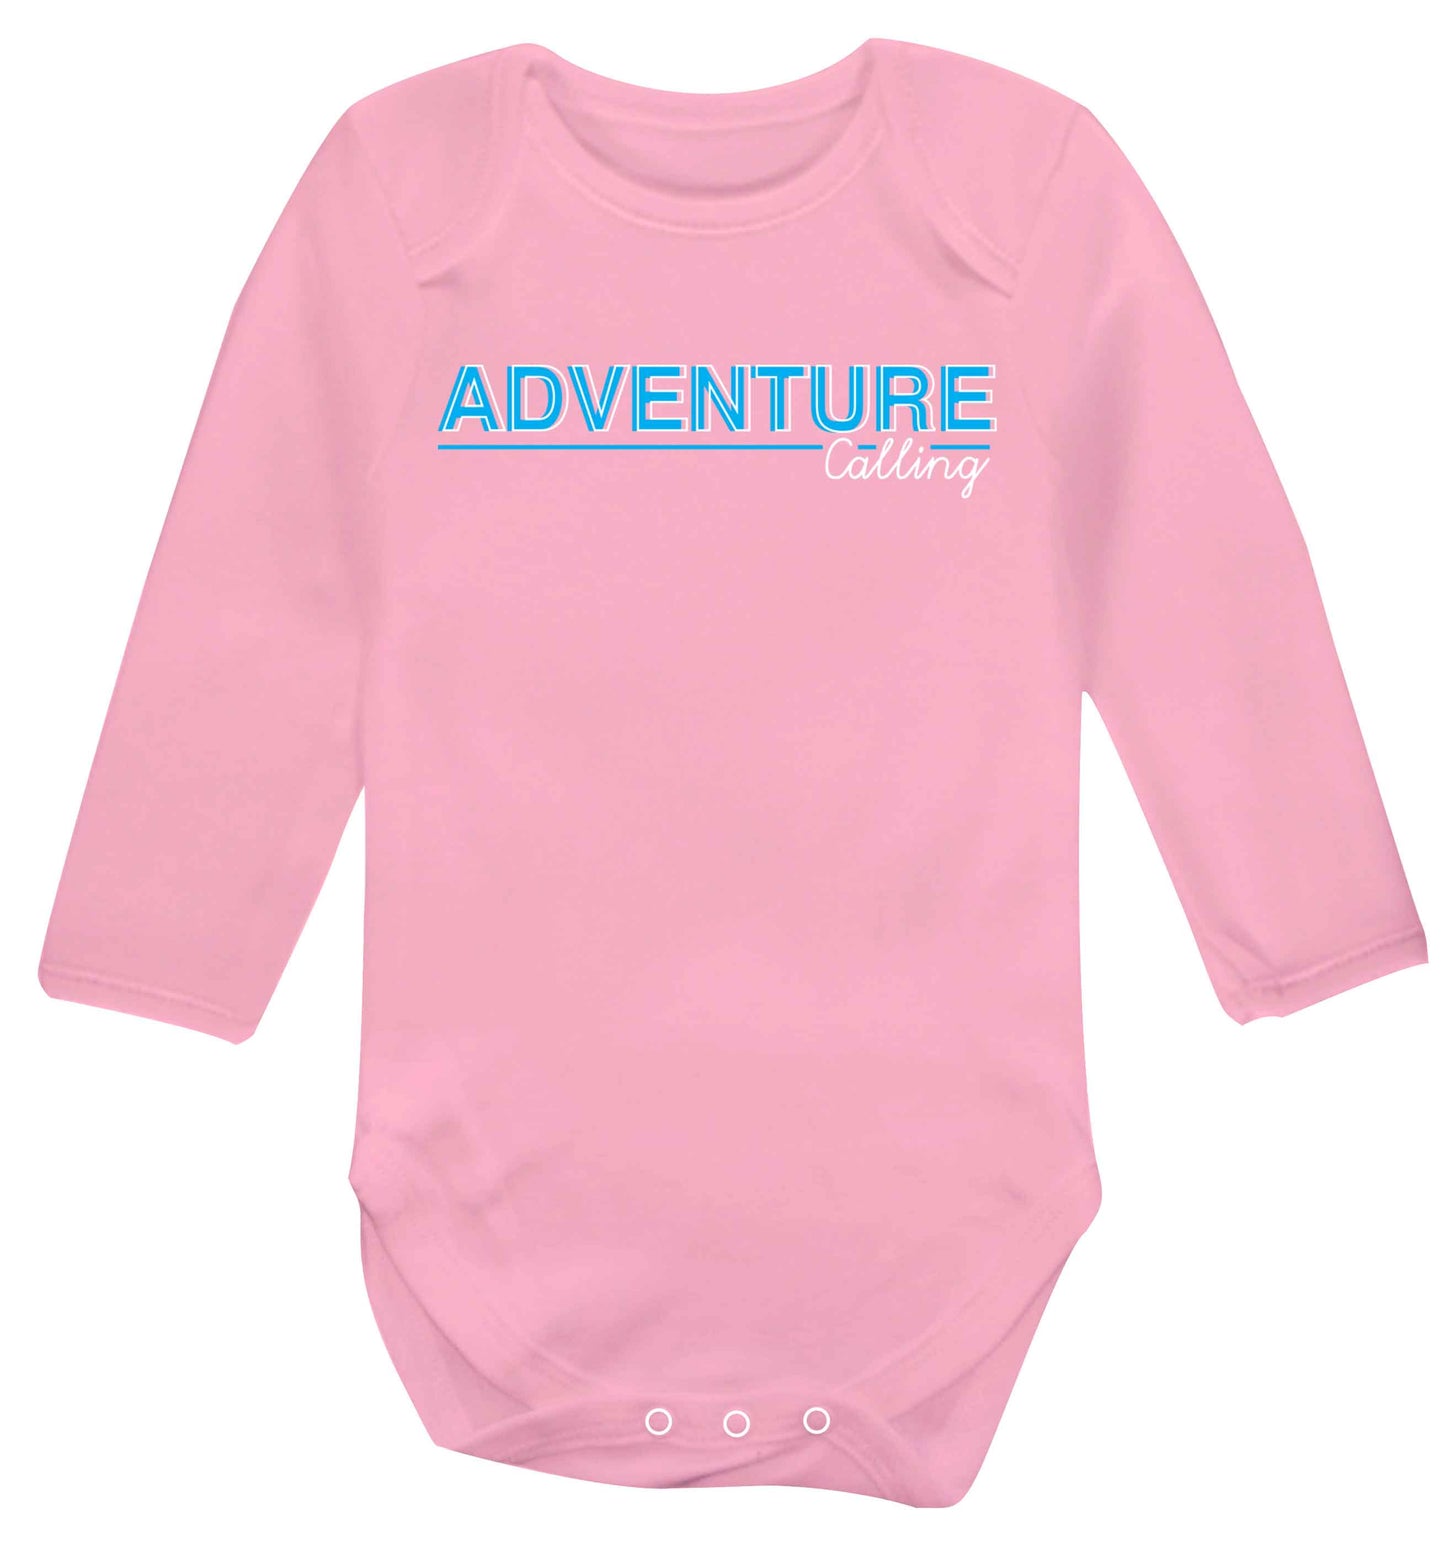 Adventure calling Baby Vest long sleeved pale pink 6-12 months